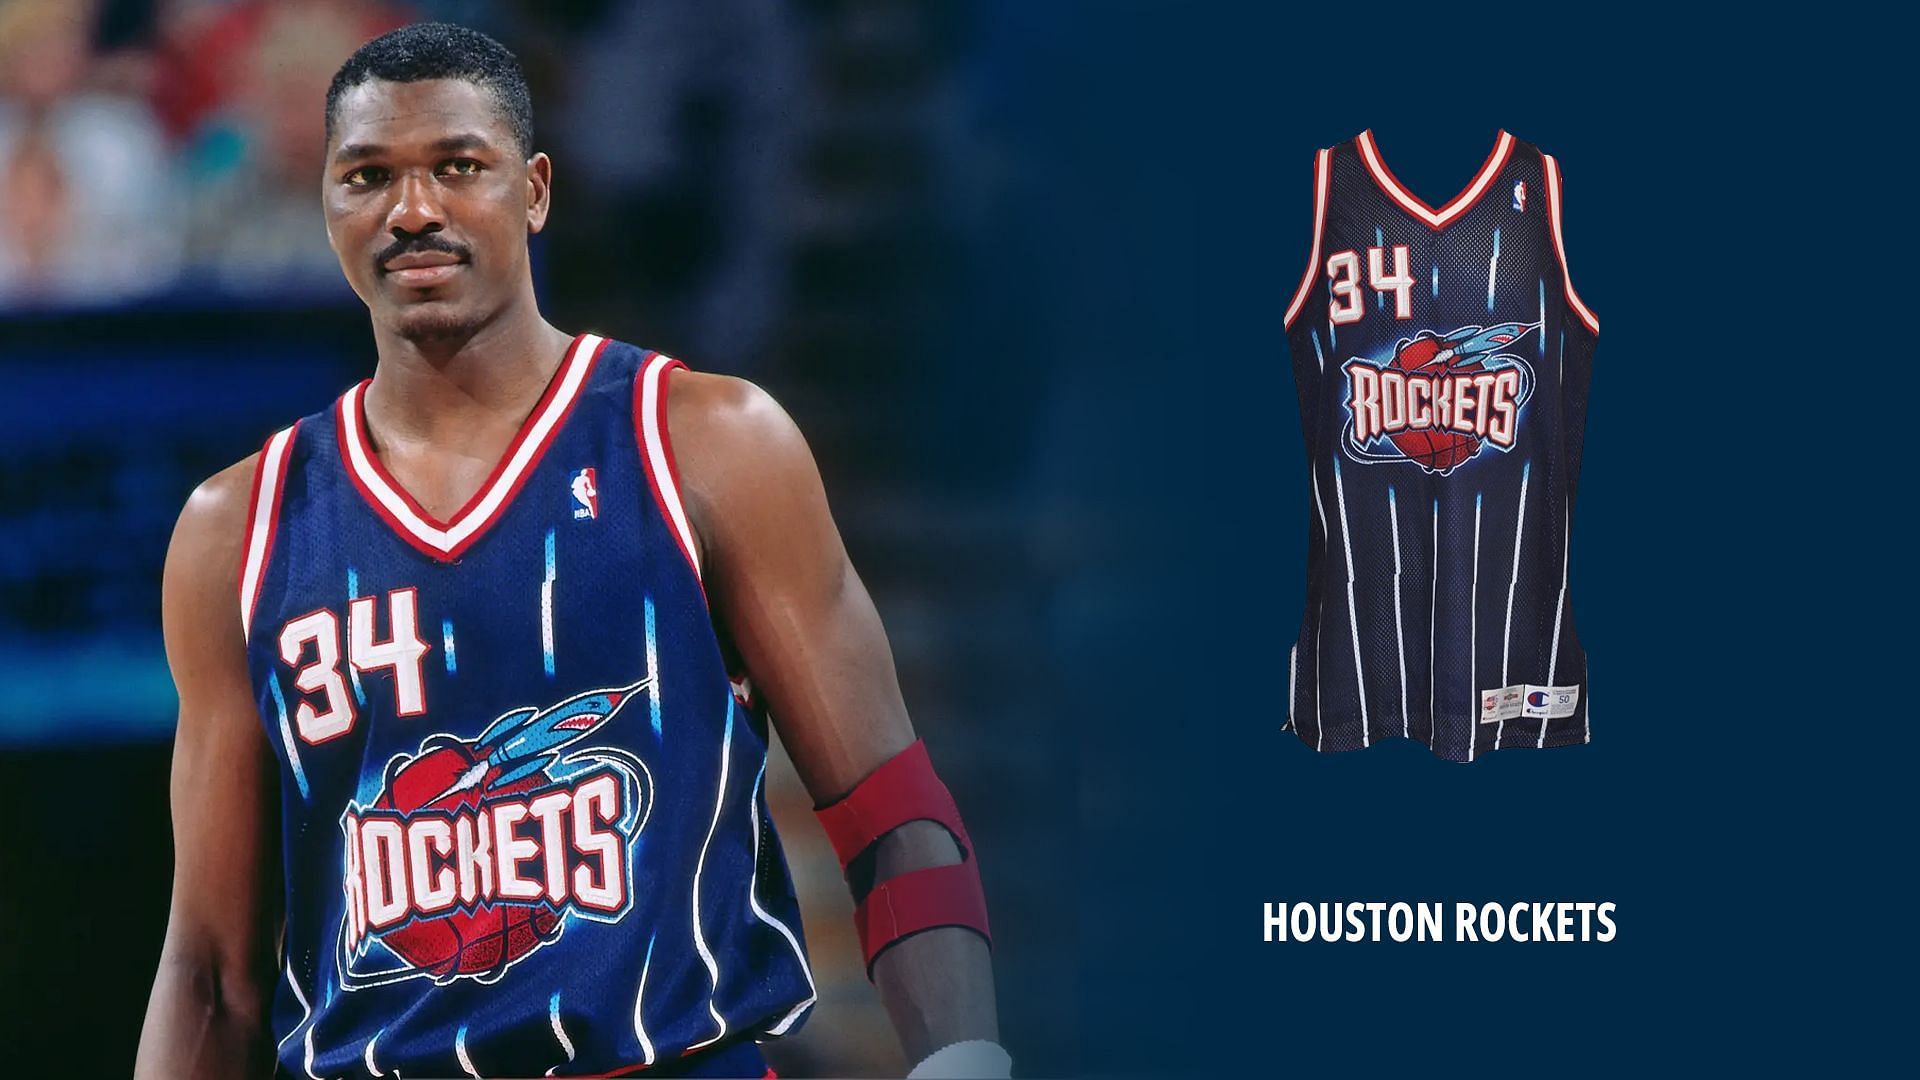 Houston Rockets had incredible jerseys after winning the championship in 1995